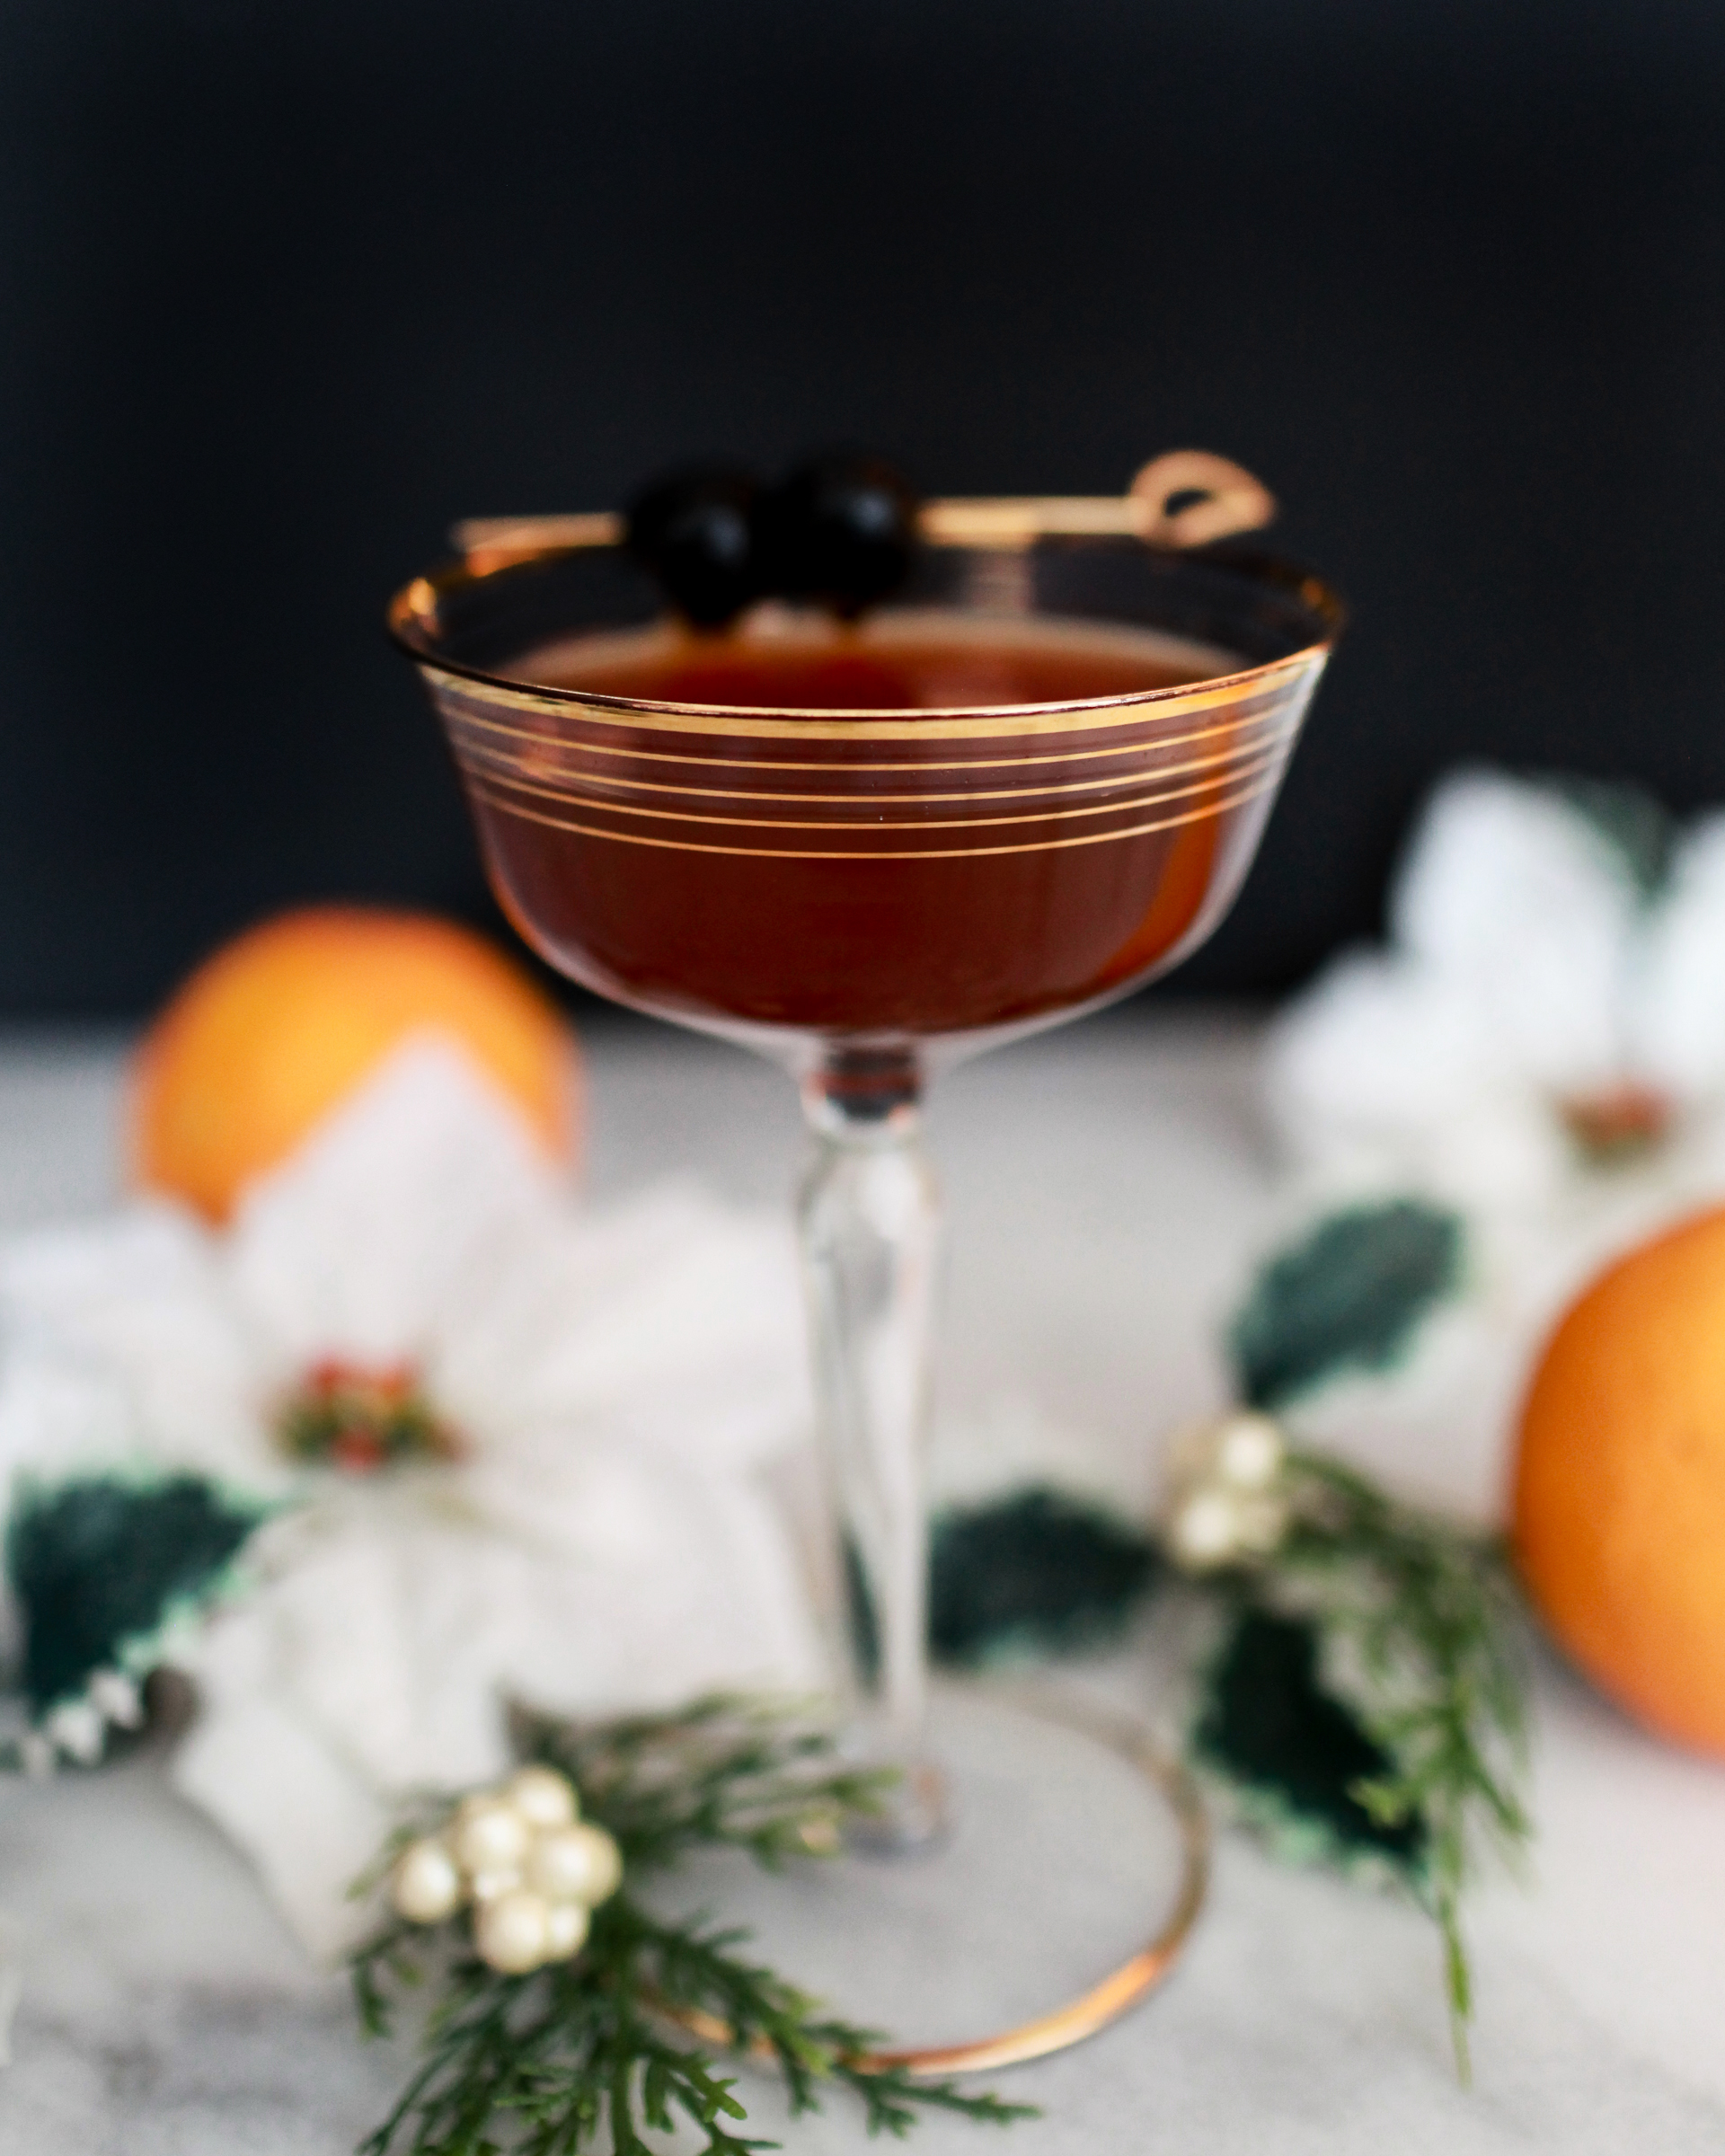 Yuletide Punch Cocktail Recipe